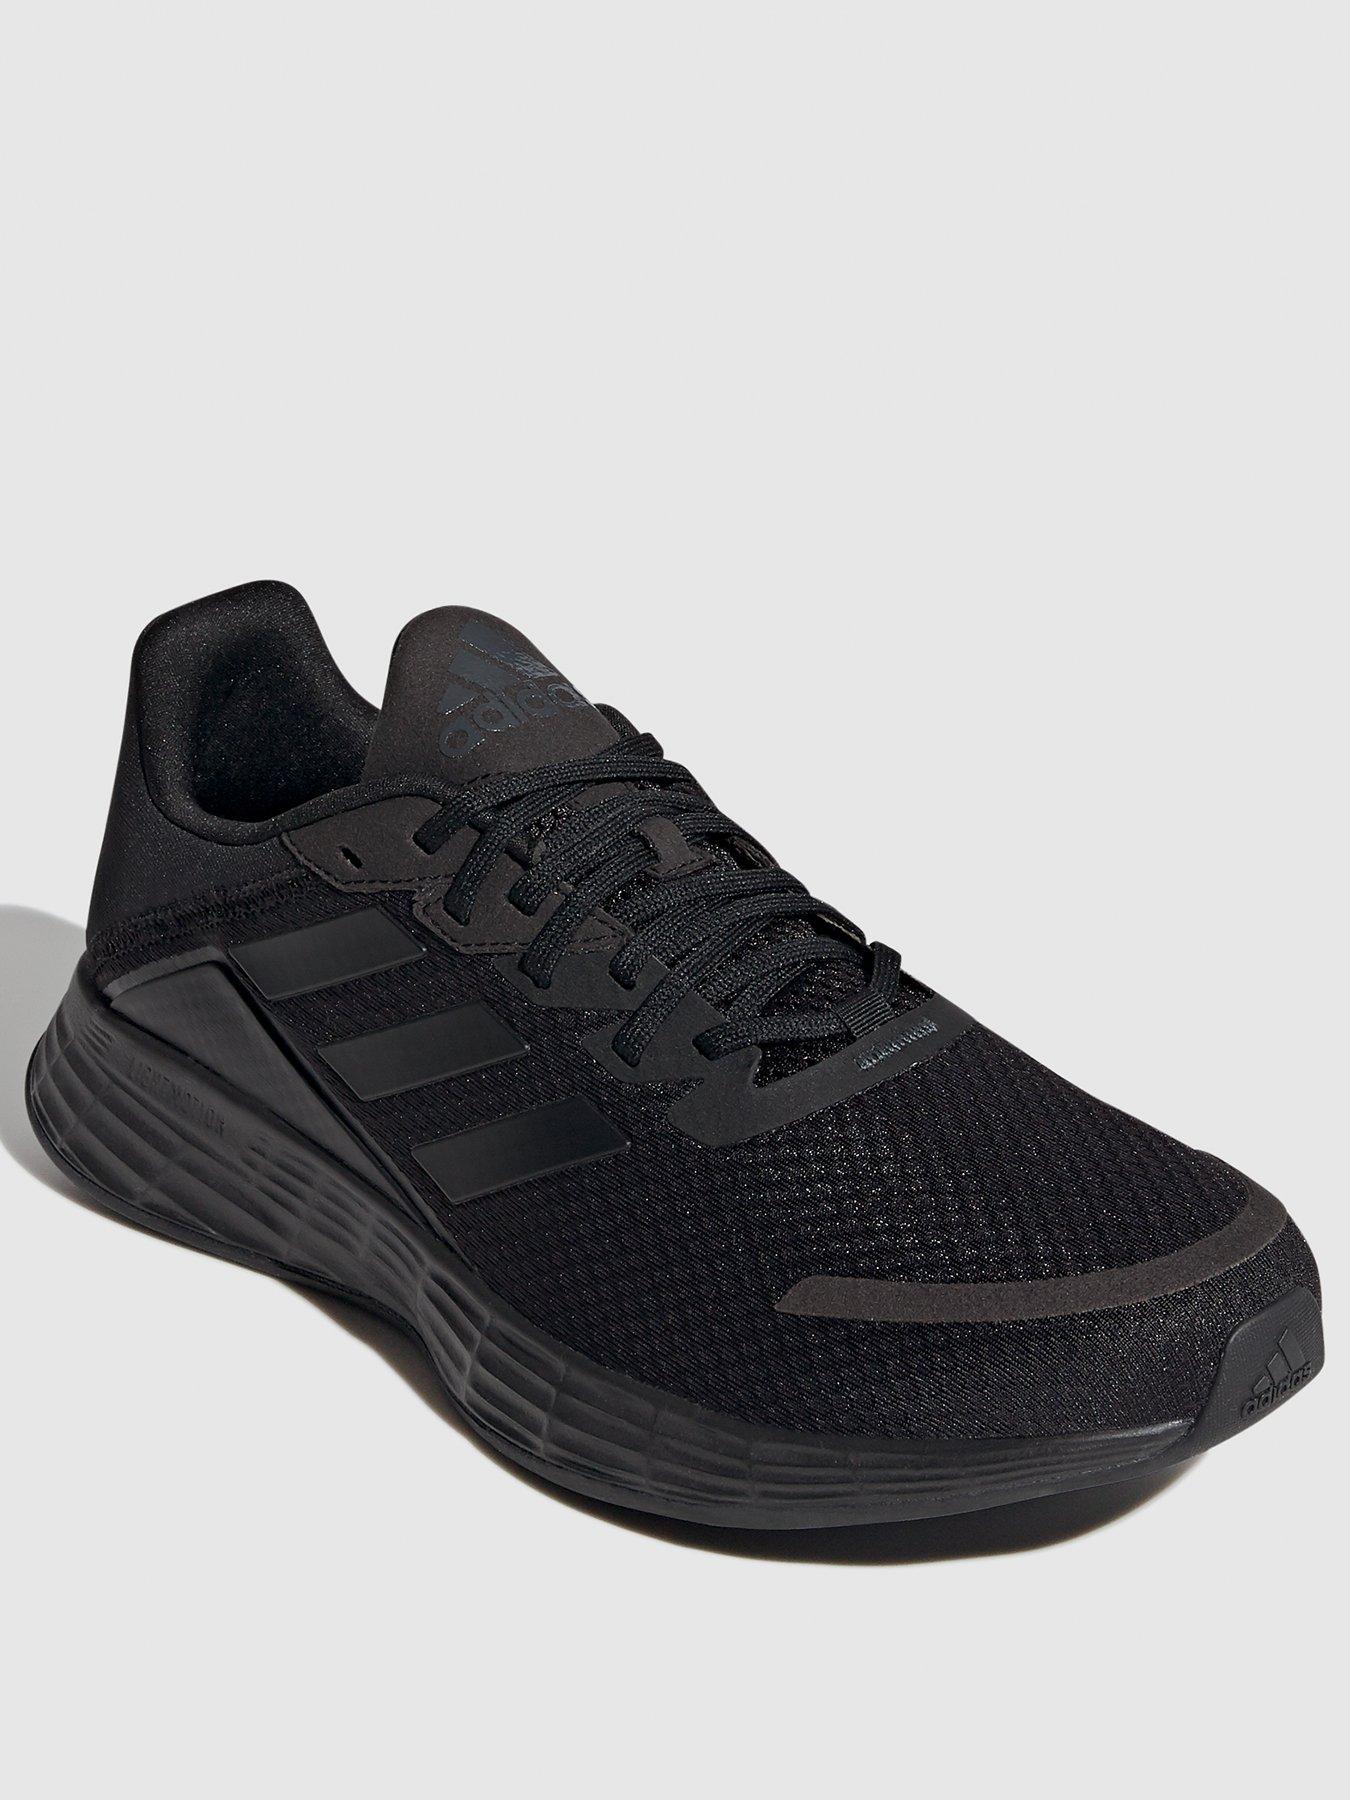 mens new trainers 219